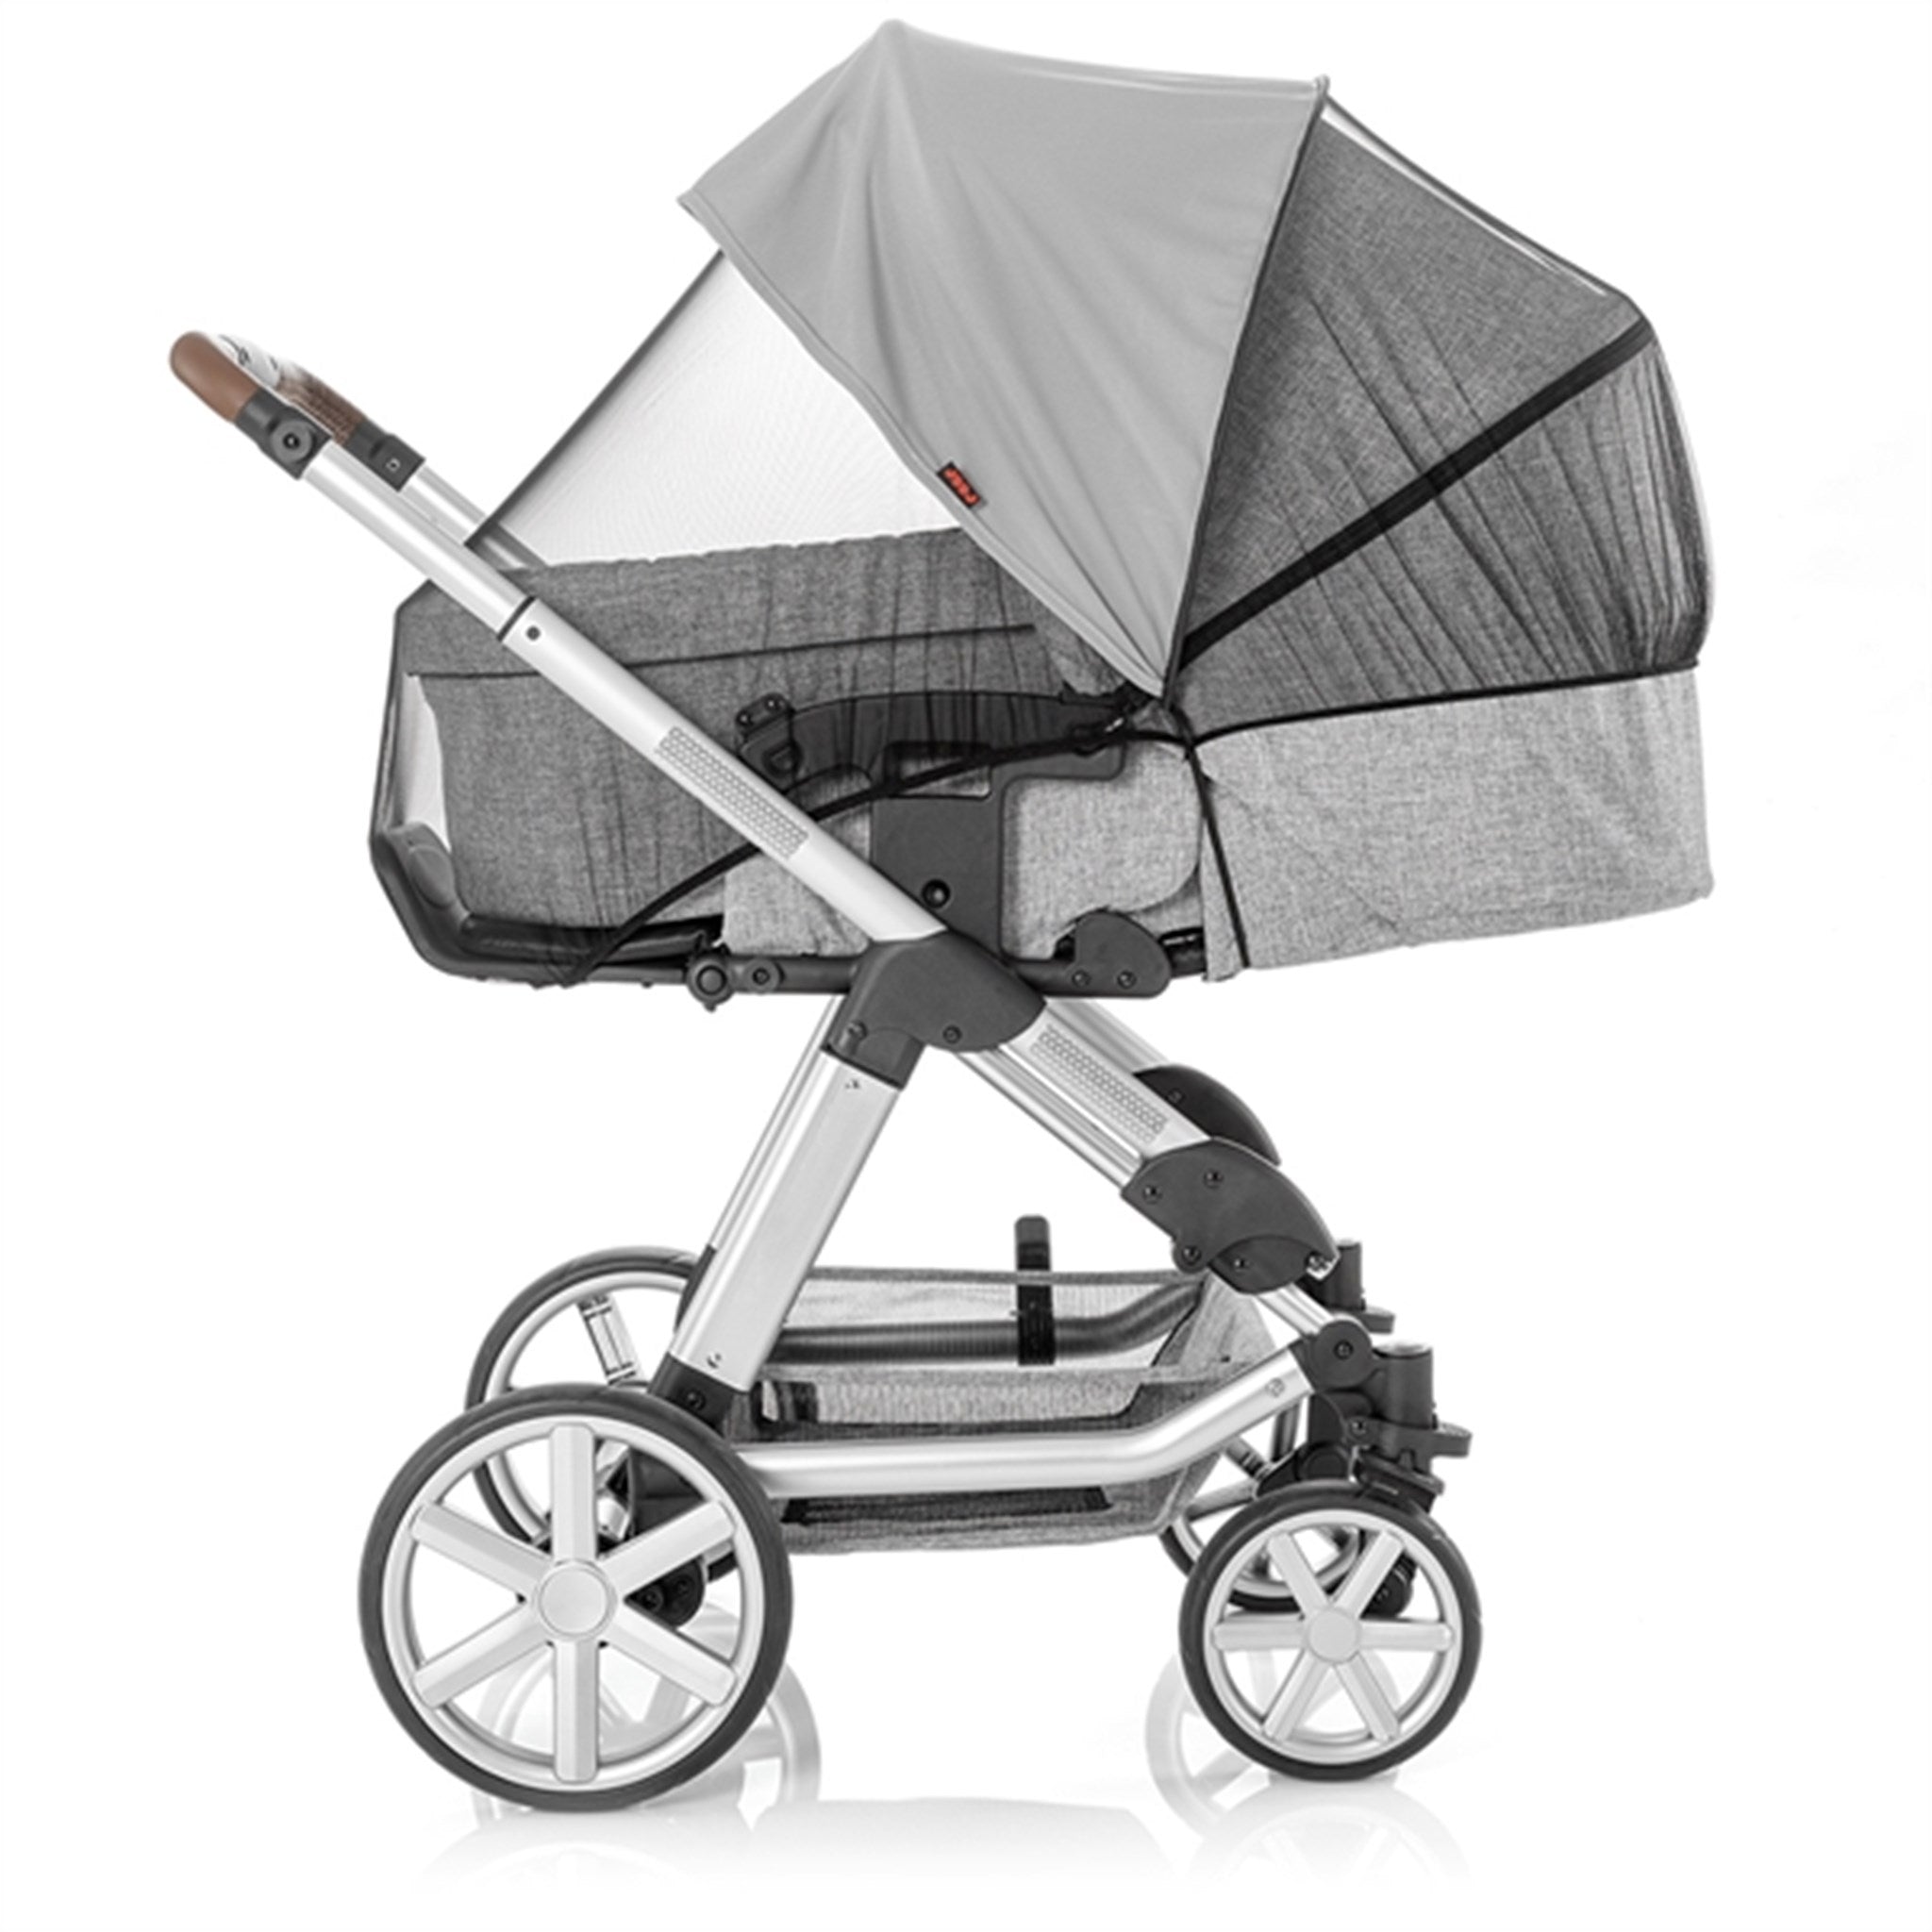 REER Sun and Insect Net for Pram